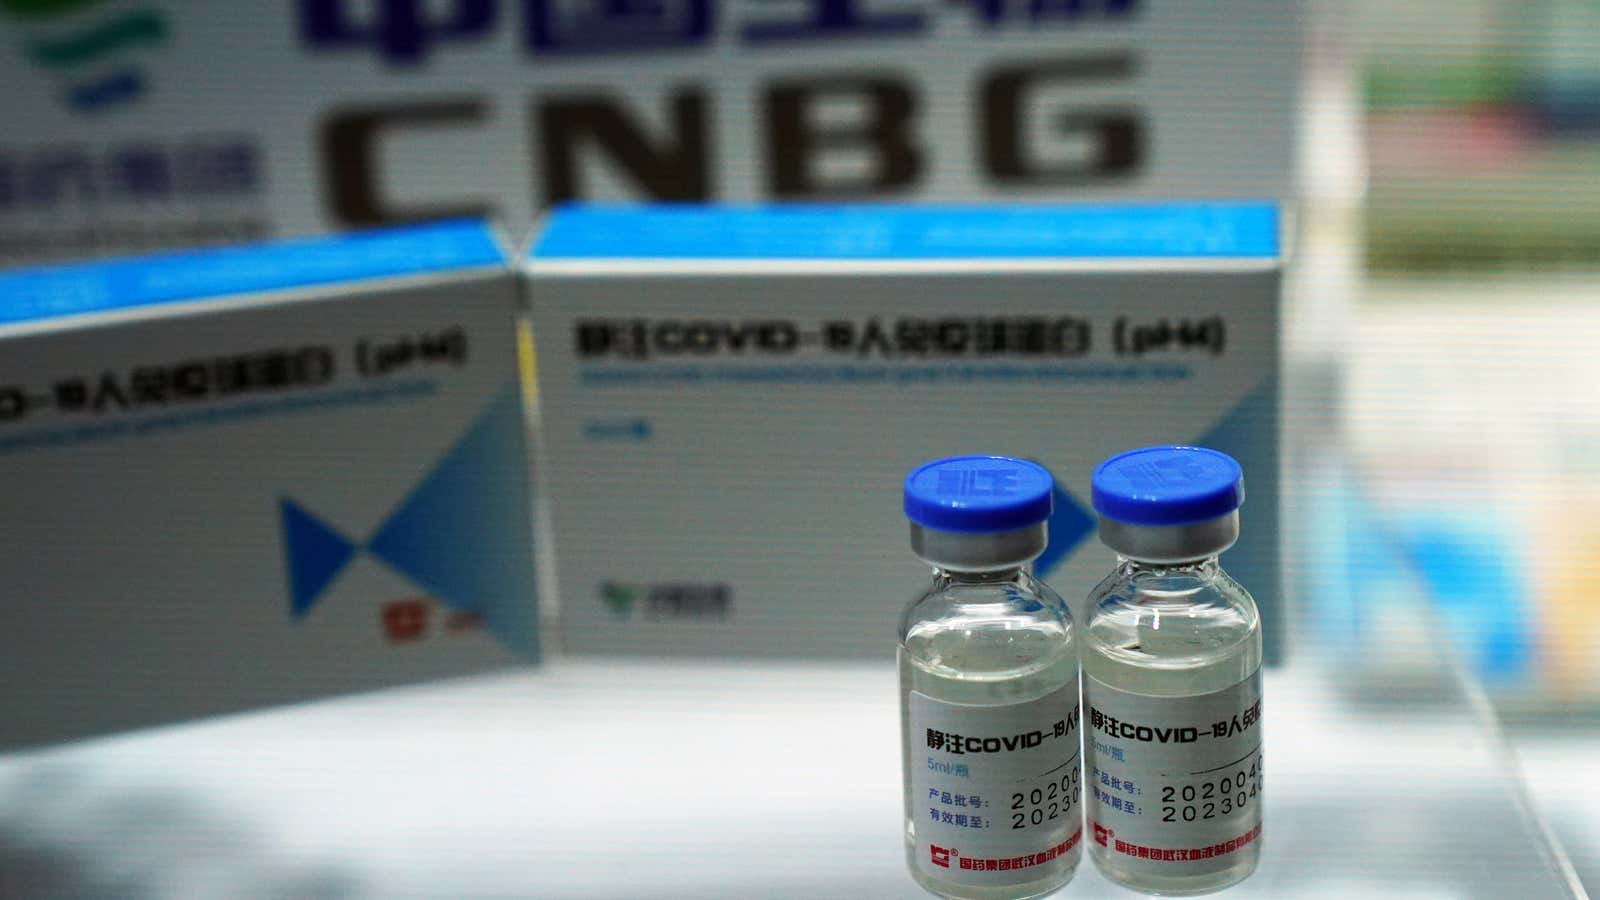 This might be the world’s most widely used vaccine.